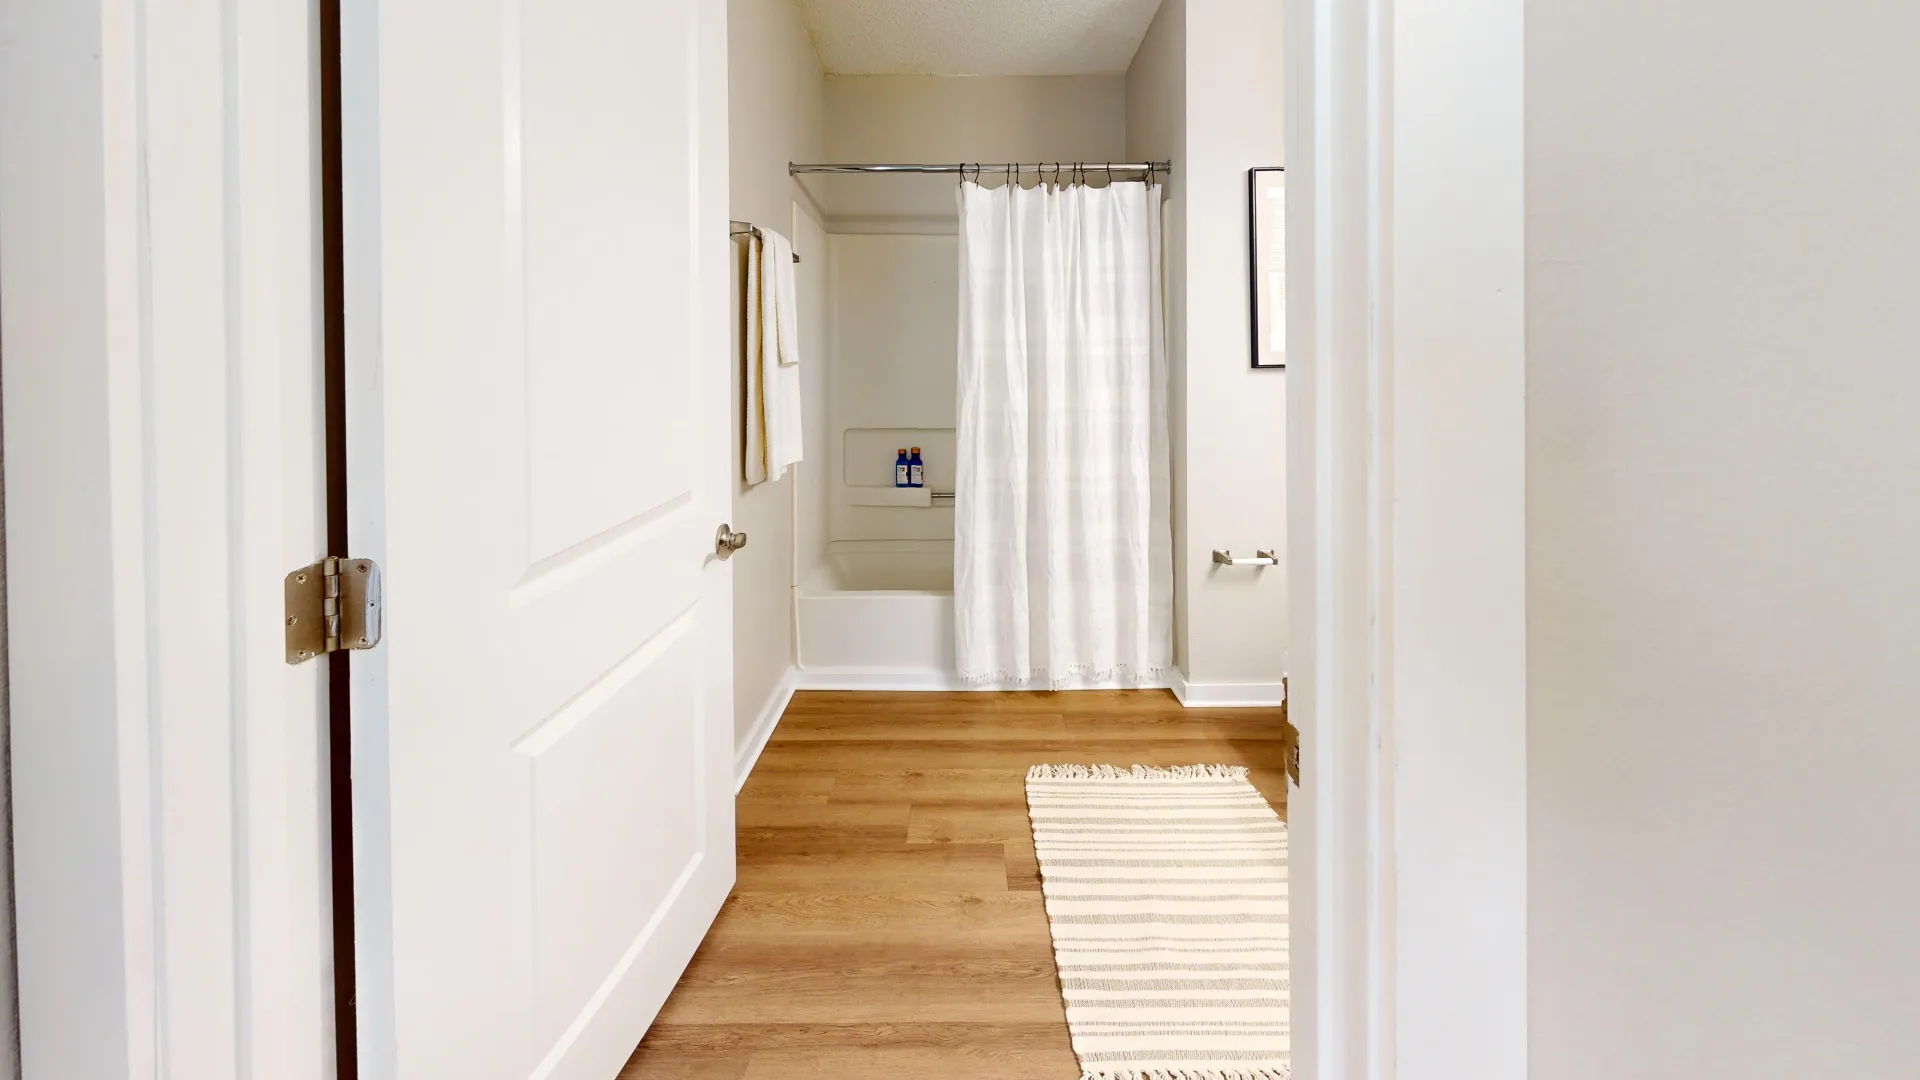 An expansive bathroom featuring a luxurious shower/tub combo, elegant wood-style flooring, and additional square footage for added comfort.